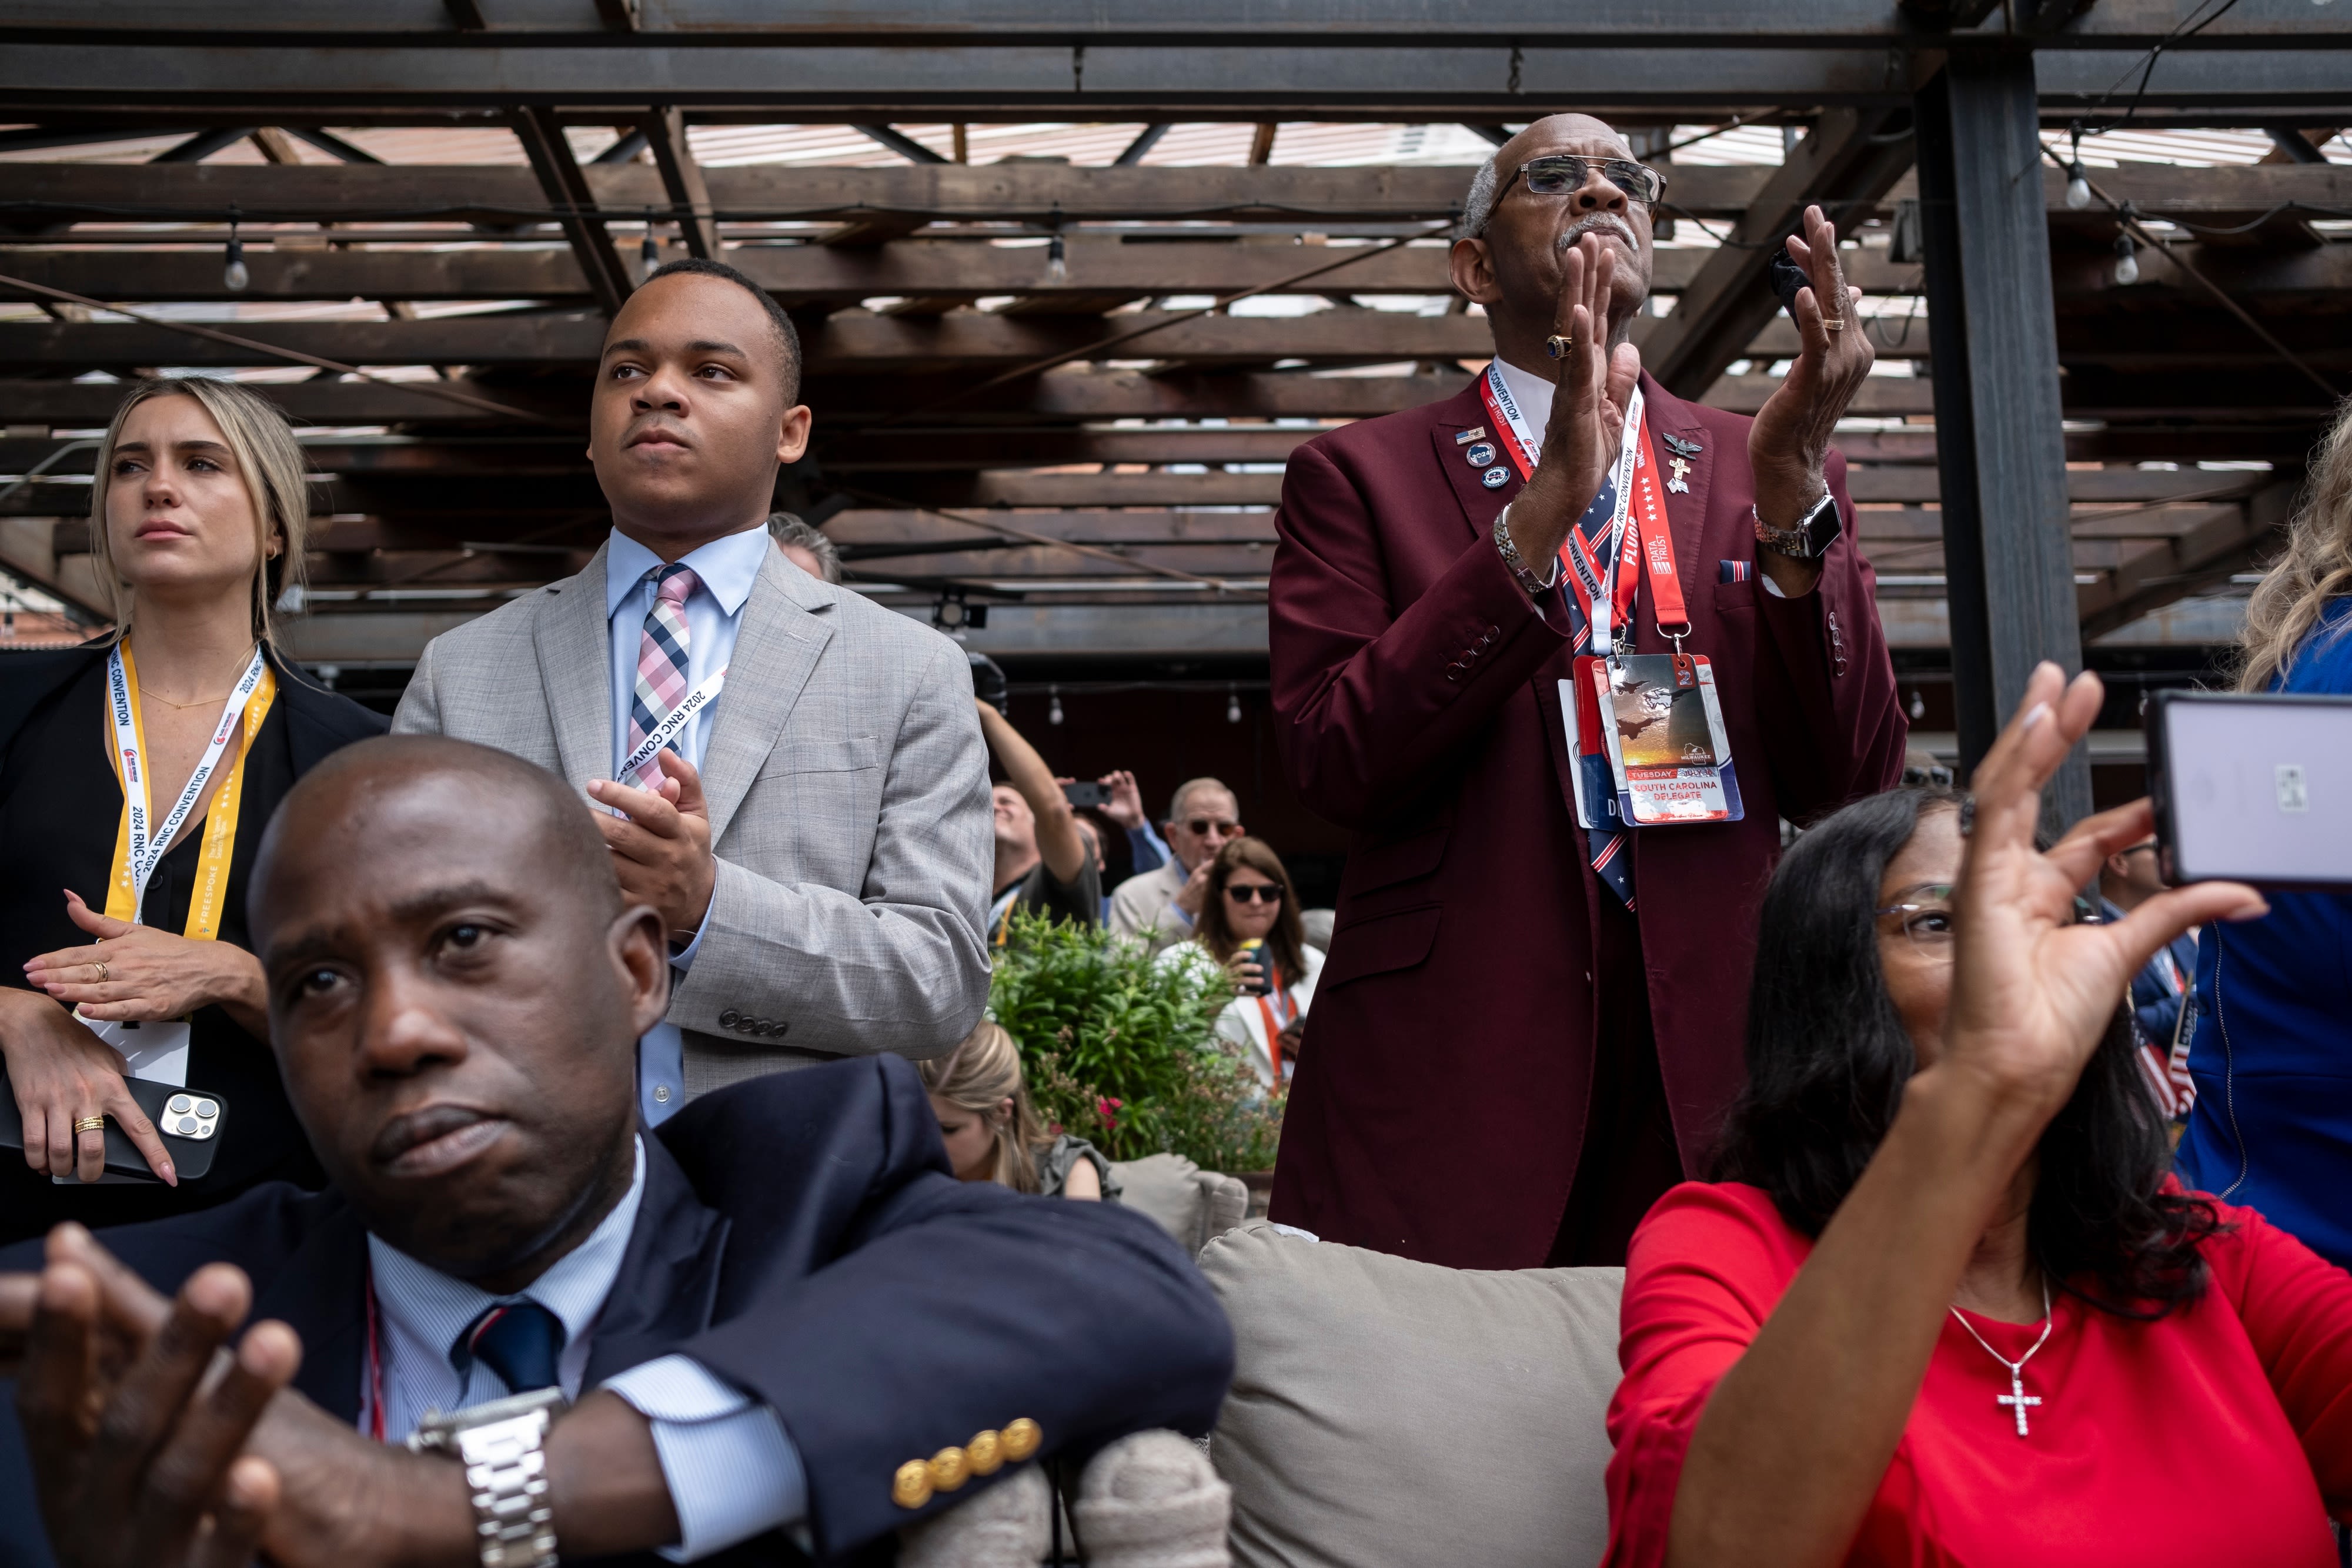 Black Republicans celebrate unity at RNC amid challenges persuading voters